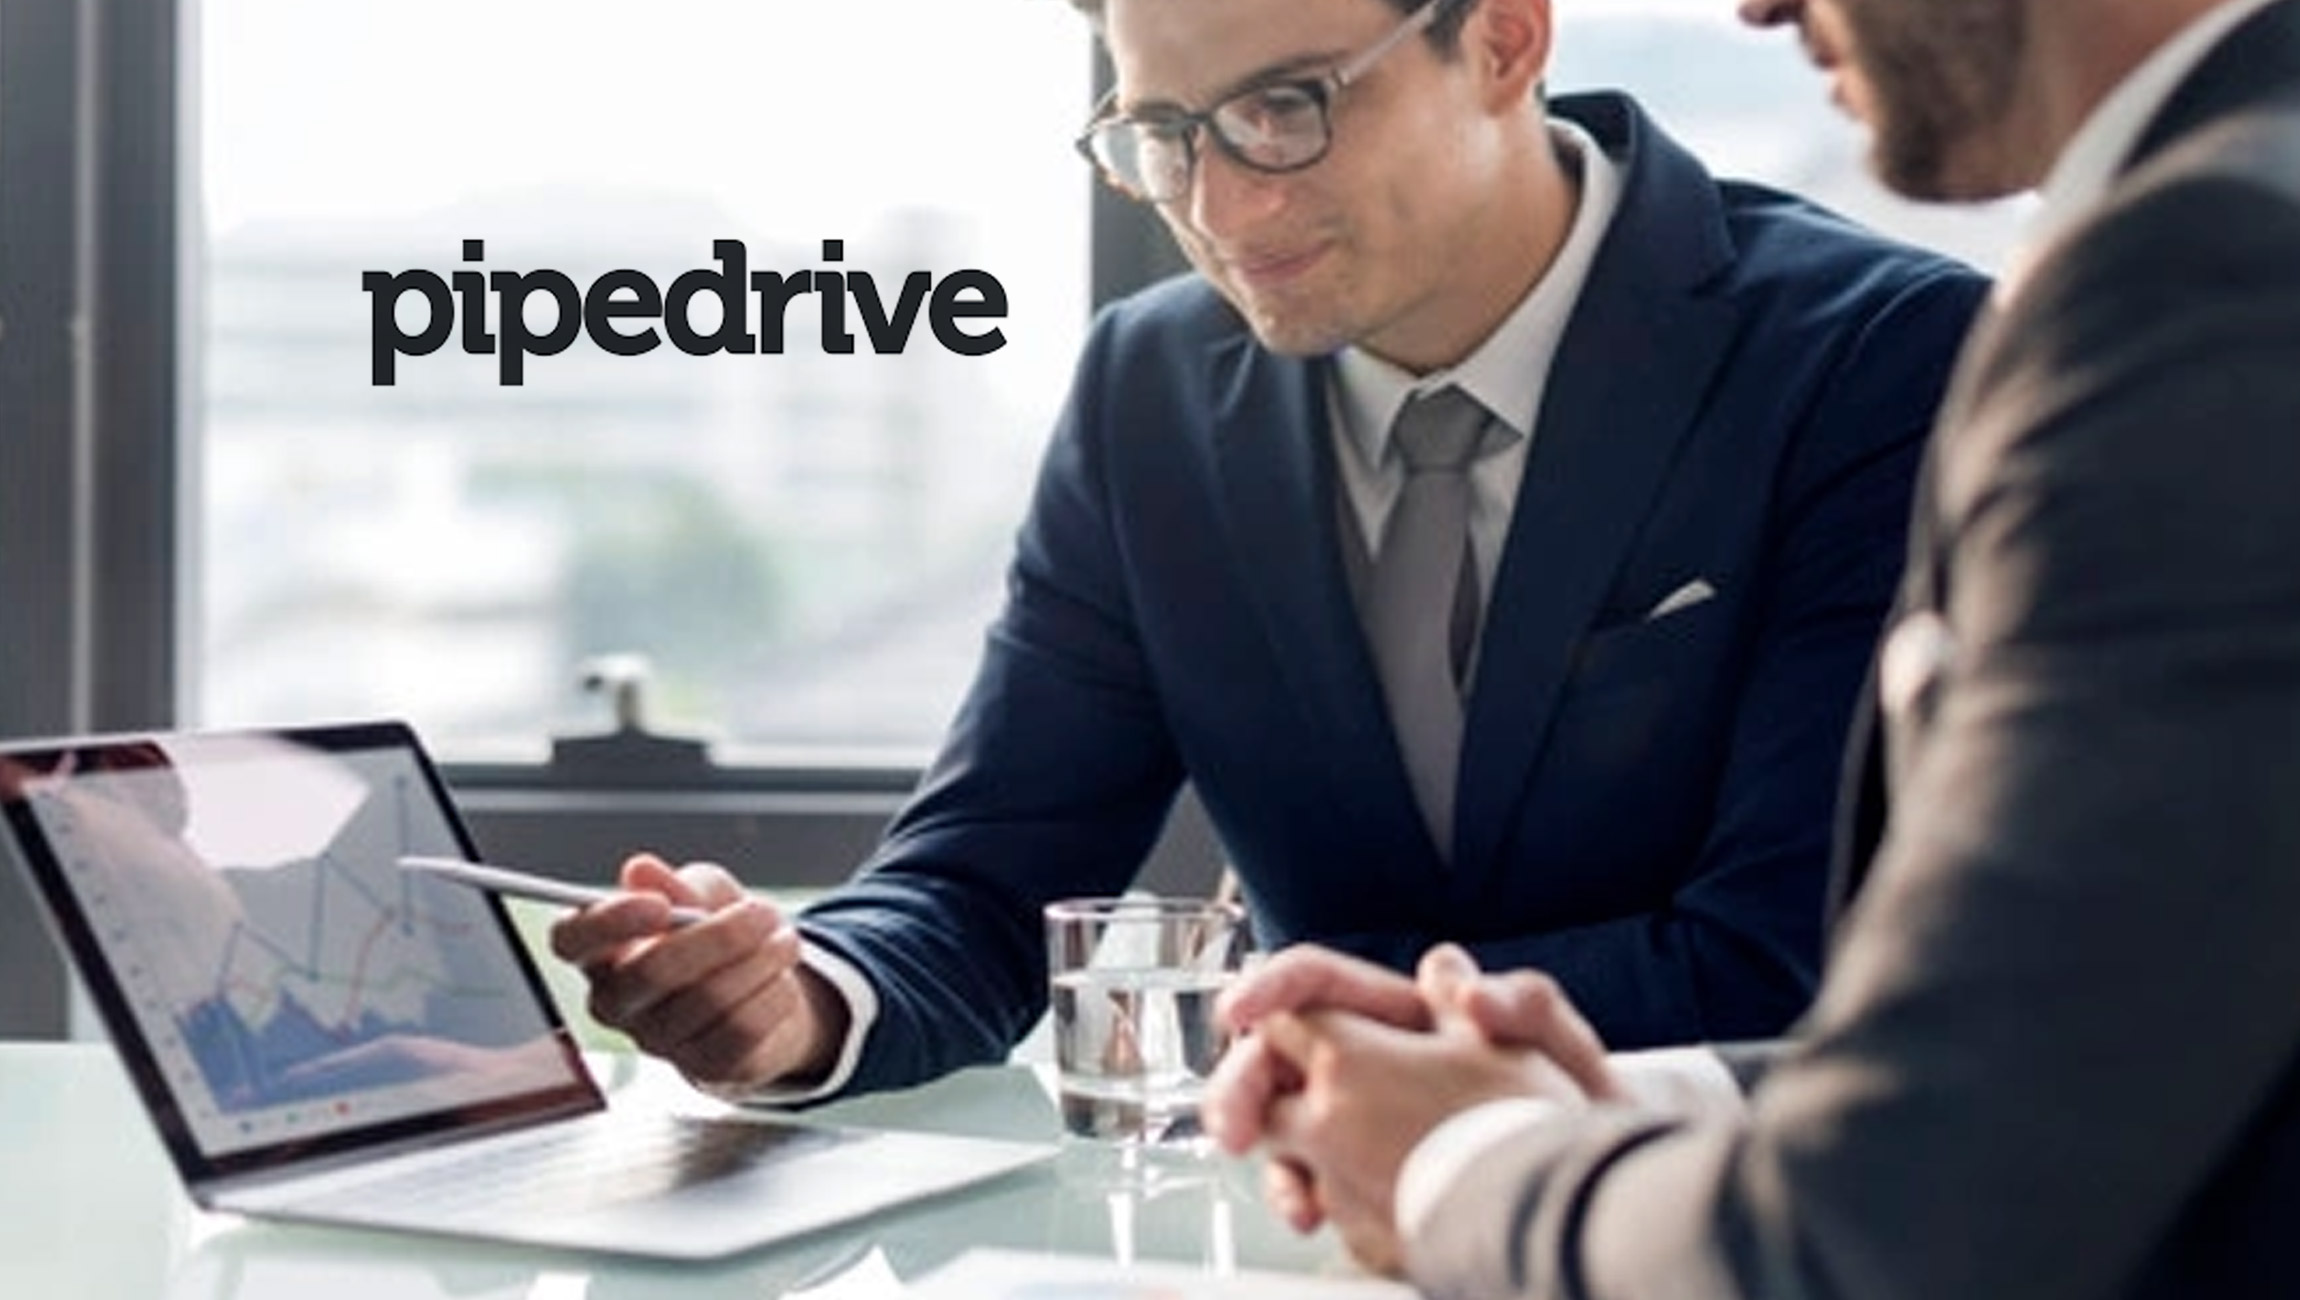 Pipedrive Opens Its Tenth Office Globally in Berlin: the Global CRM Provider Is Doubling Down on the German Market